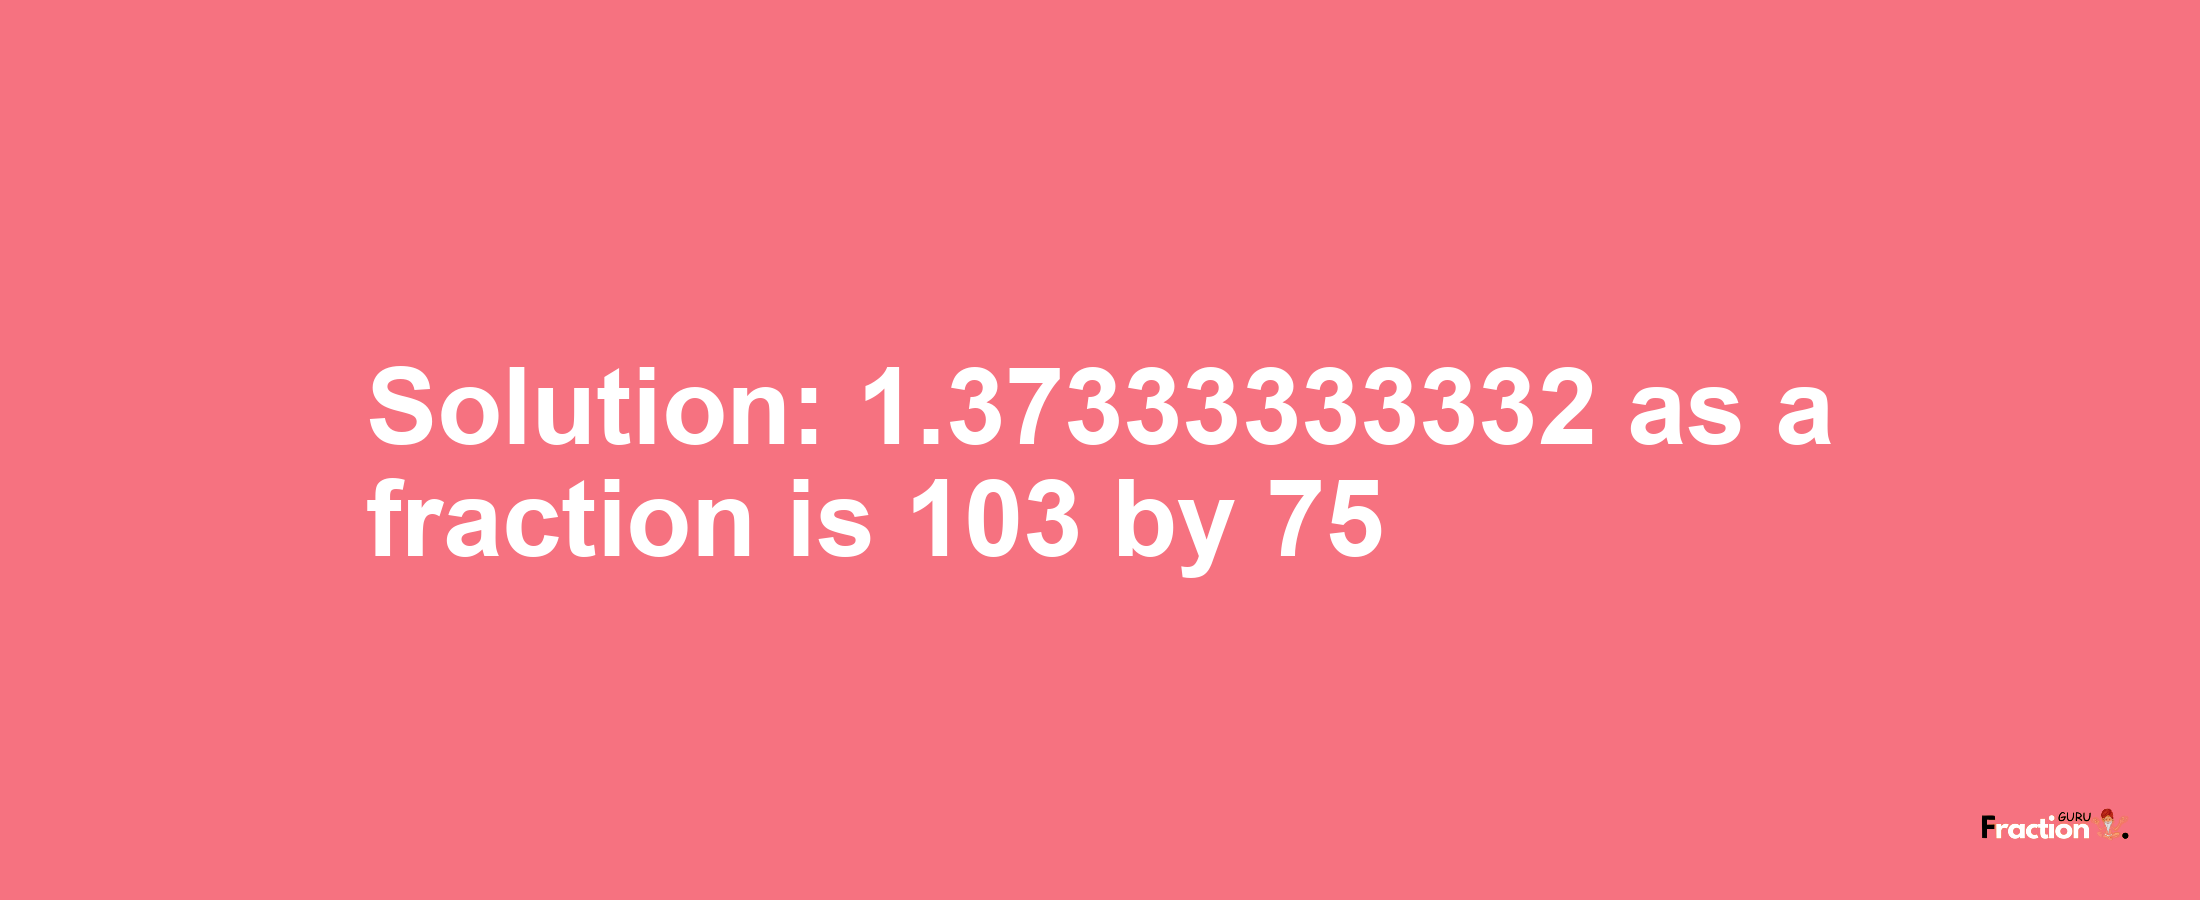 Solution:1.37333333332 as a fraction is 103/75